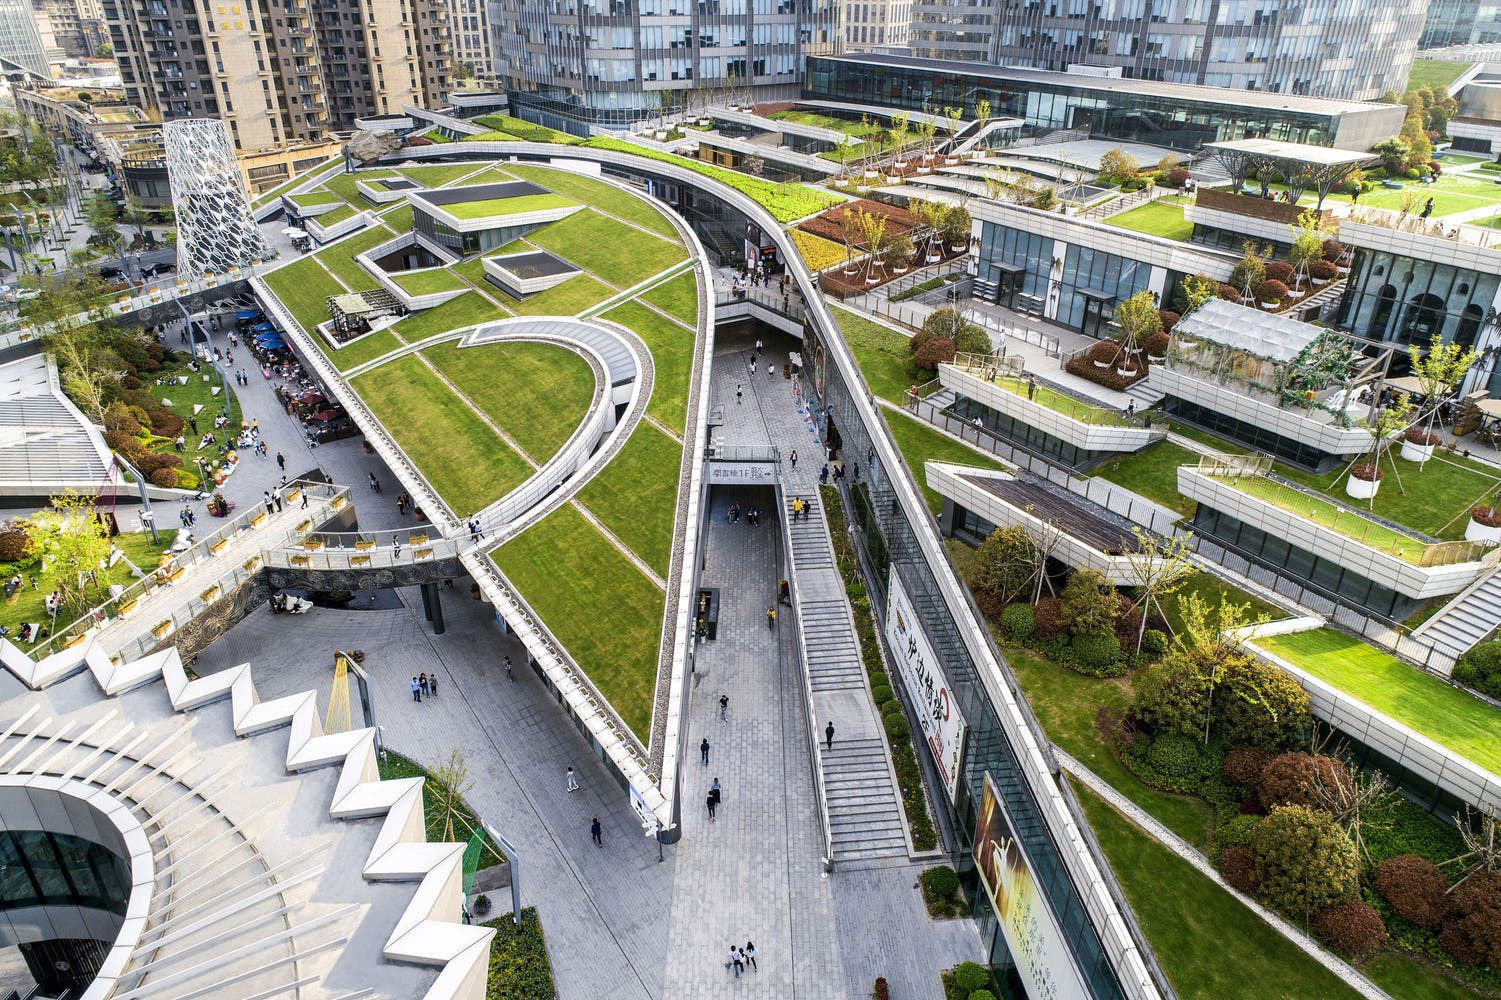 Urban gardens and electric fleets: 7 cities winning on climate change